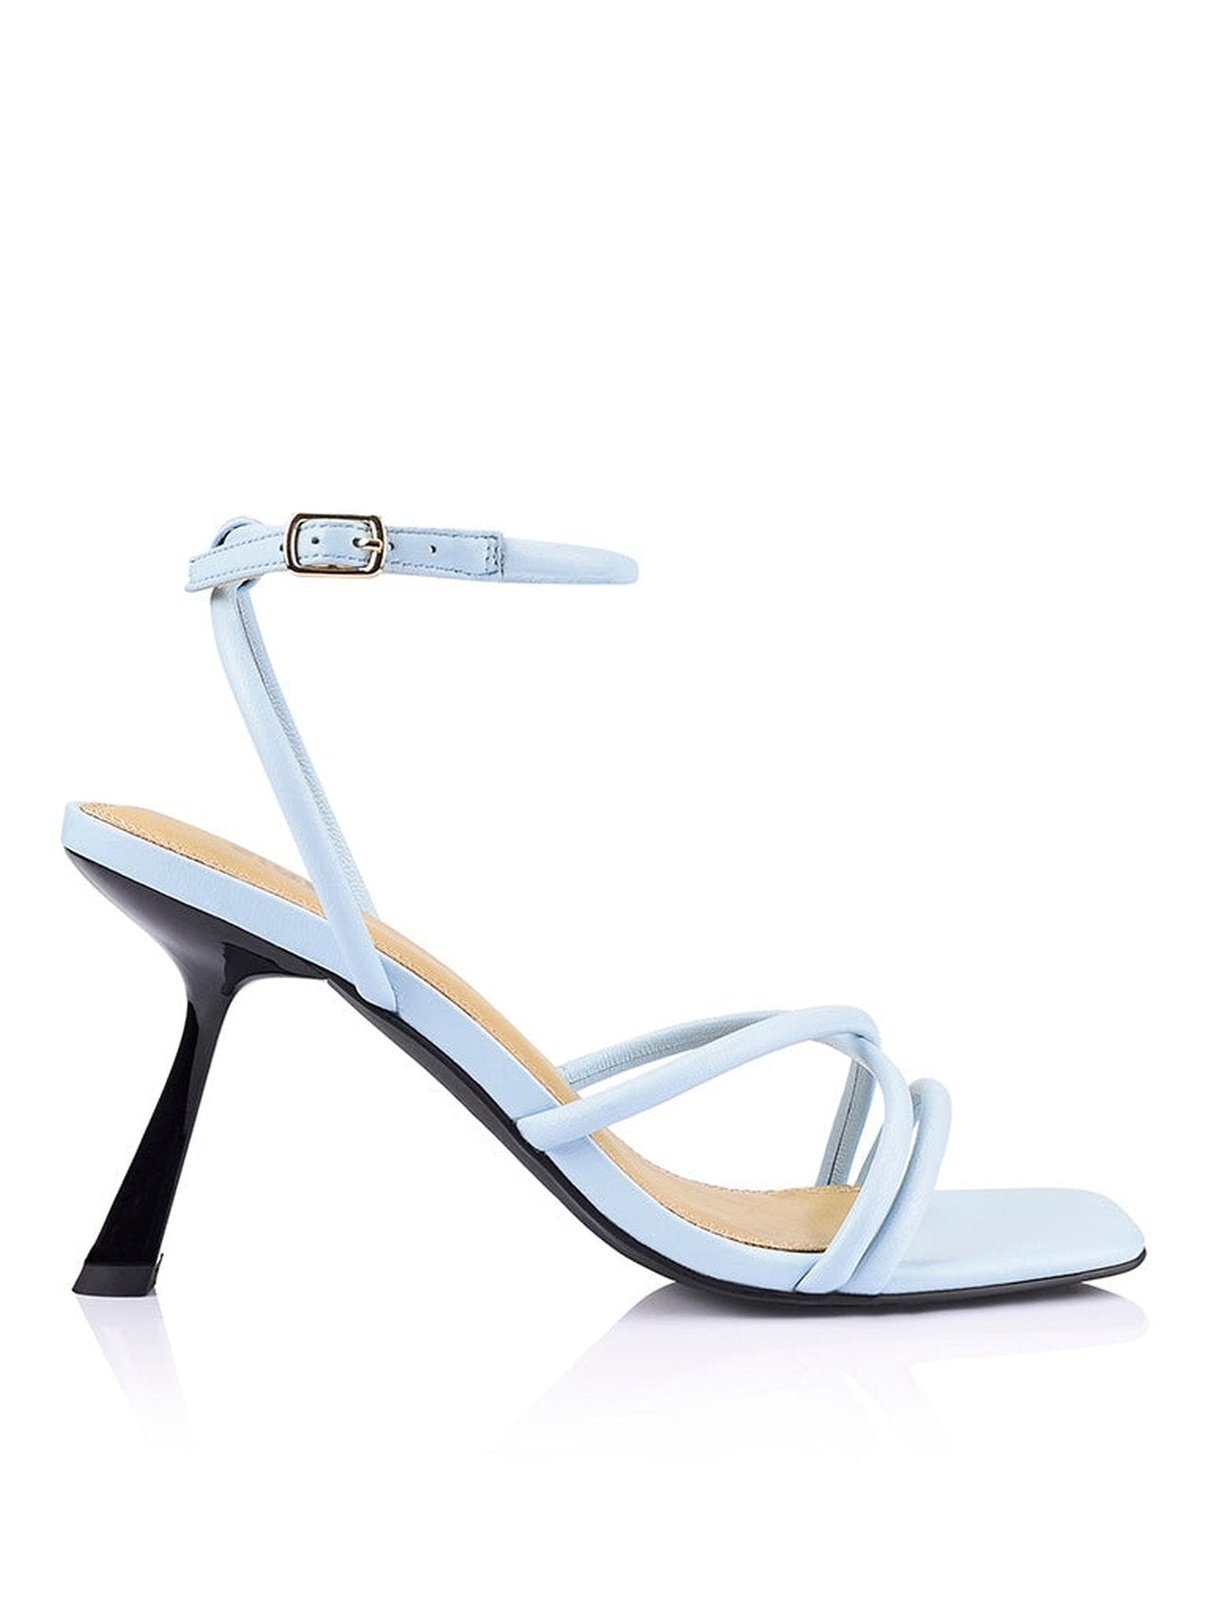 Spruce Heeled Sandals - Pale Blue Leather